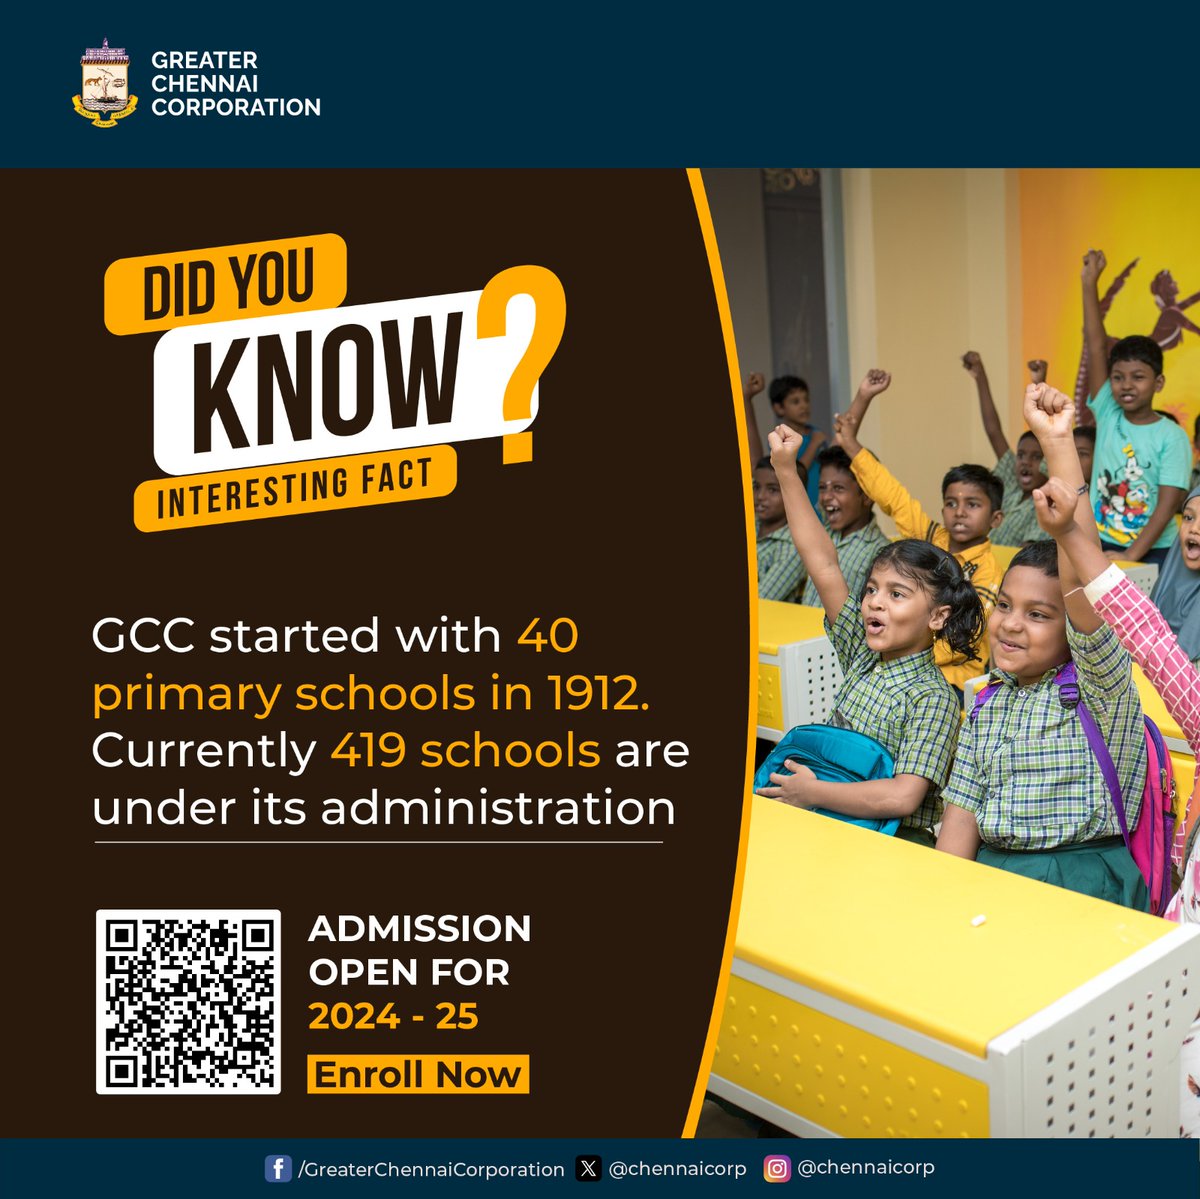 Dear #Chennaiities.

The educational legacy of #GCC traces back to 1912, marked by the establishment of 40 Primary Schools as the initial #GCC Schools. Today, #GCC runs 419 schools in #Chennai branded as #TheChennaiSchool.

@RAKRI1
#ChennaiCorporation
#HeretoServe